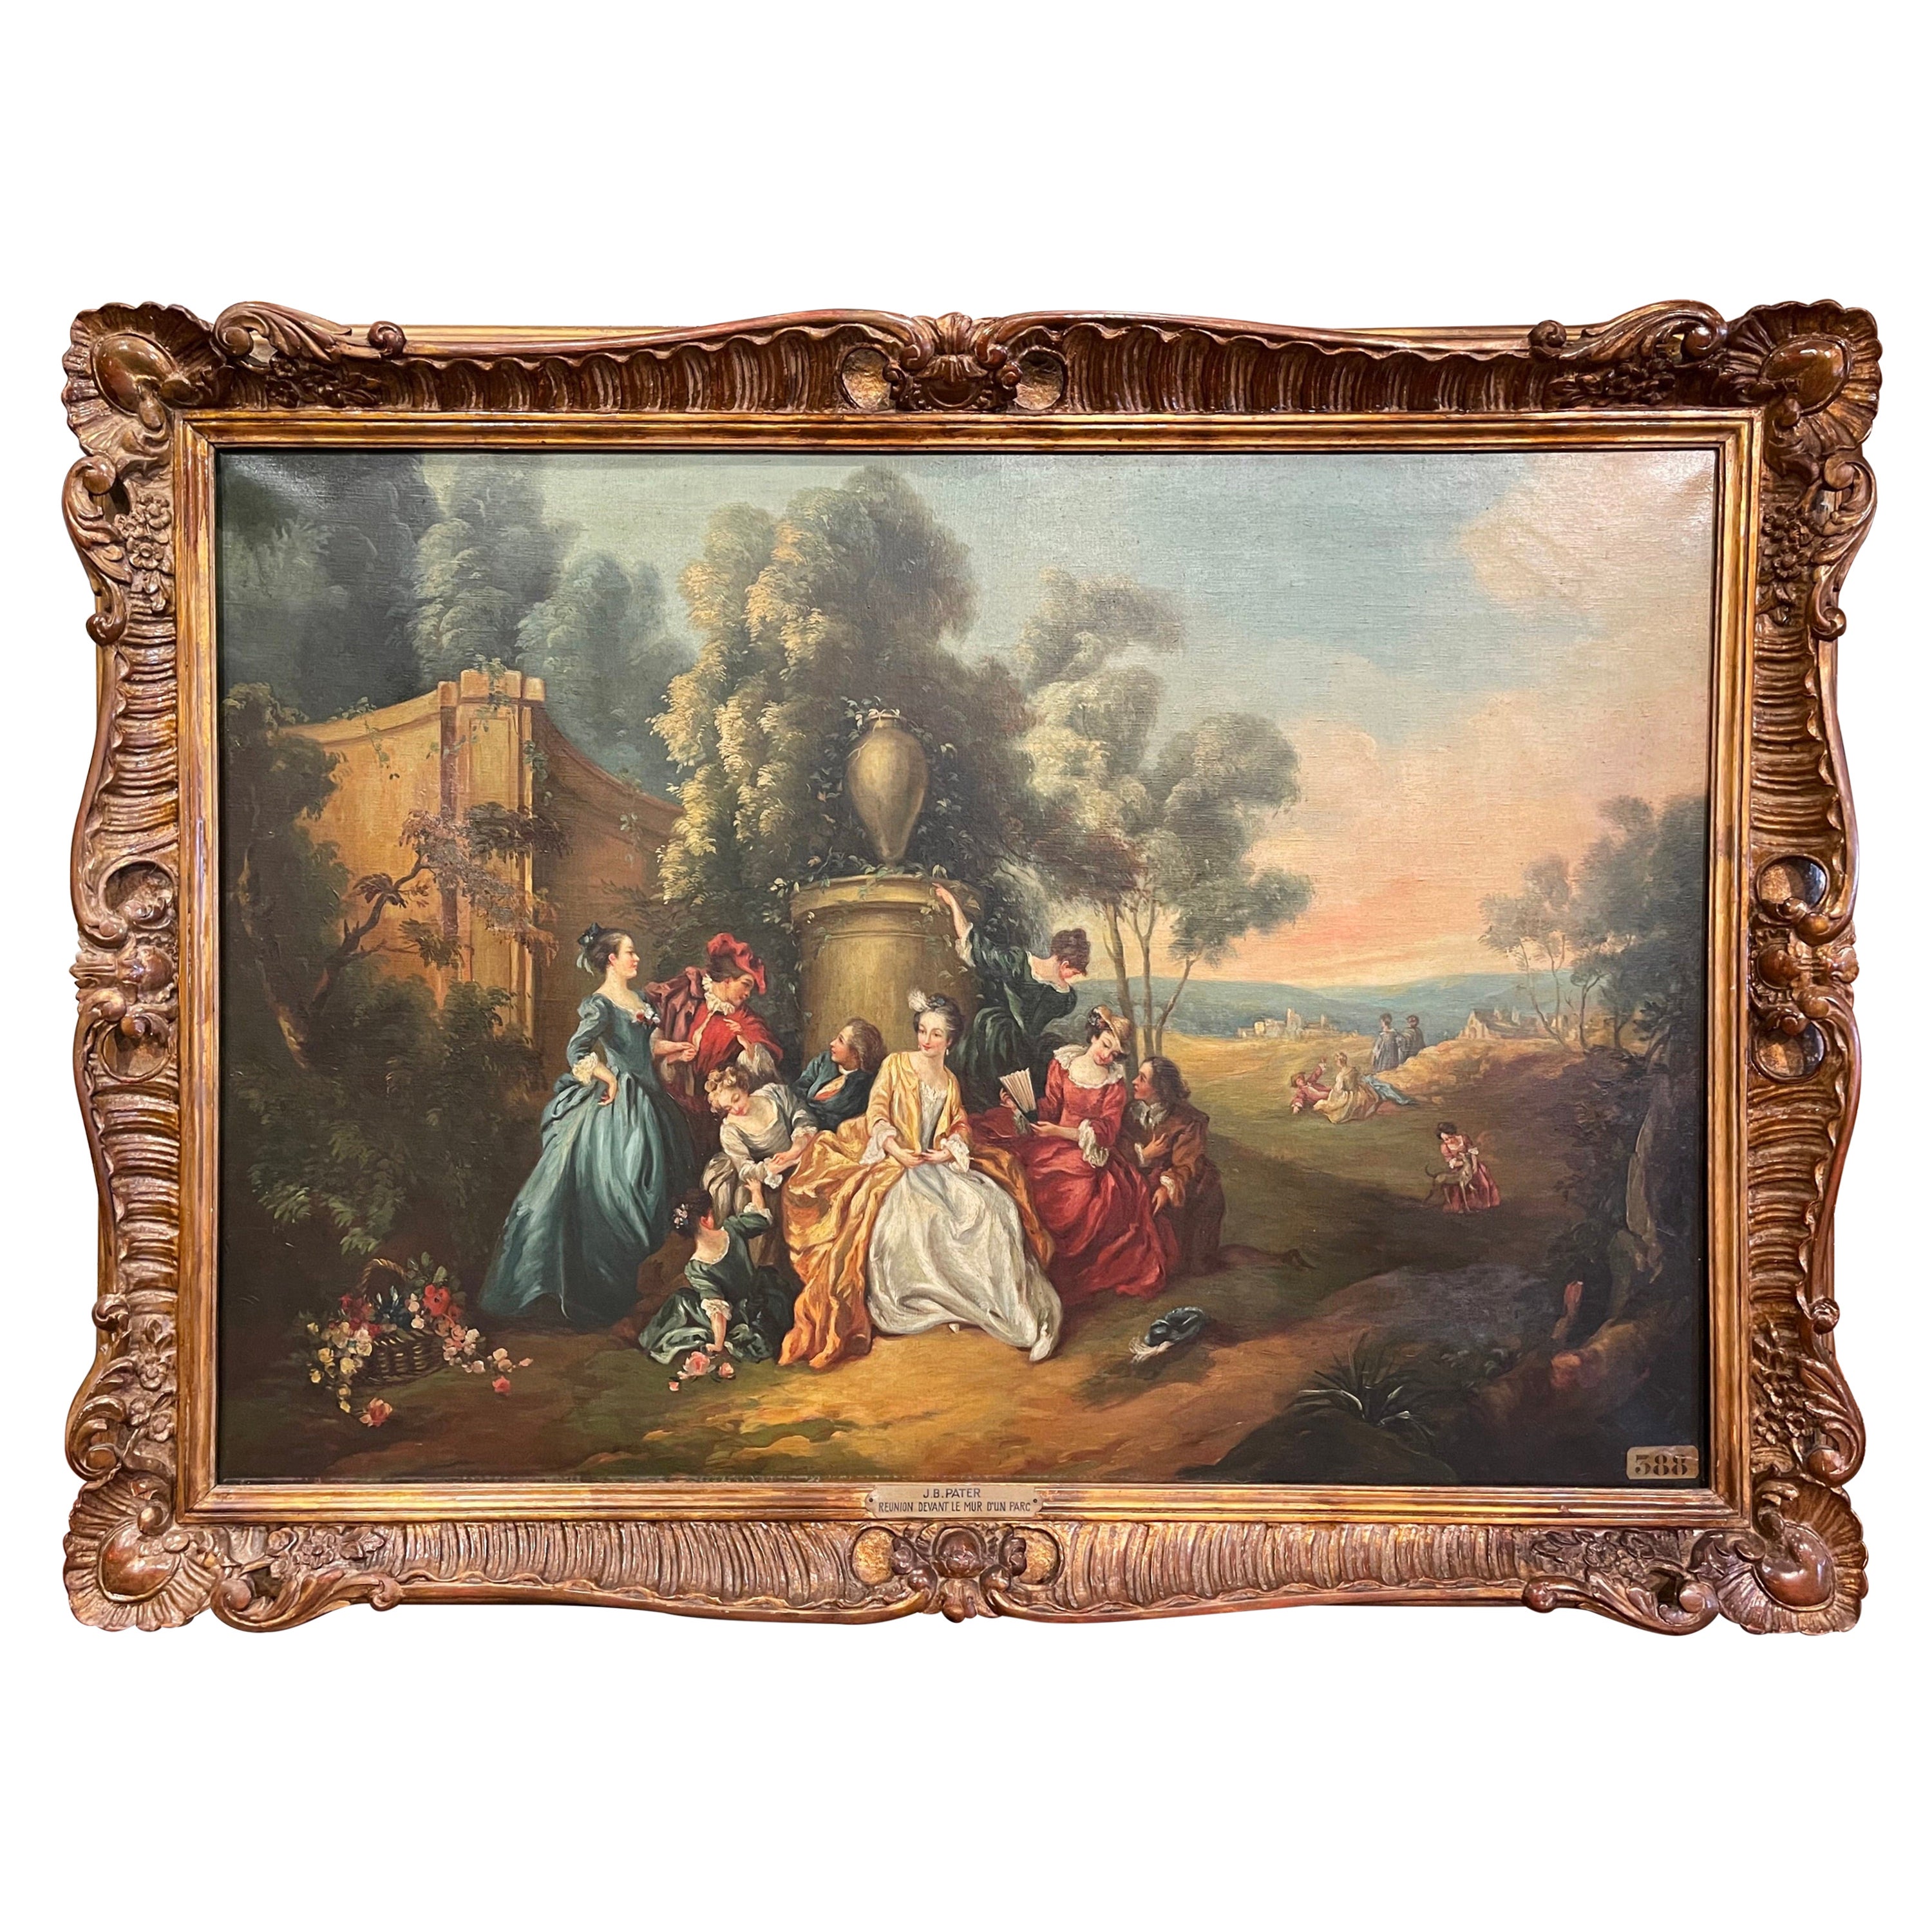 19th Century French Oil on Canvas "Fete Galante" Painting After J.B. Pater For Sale